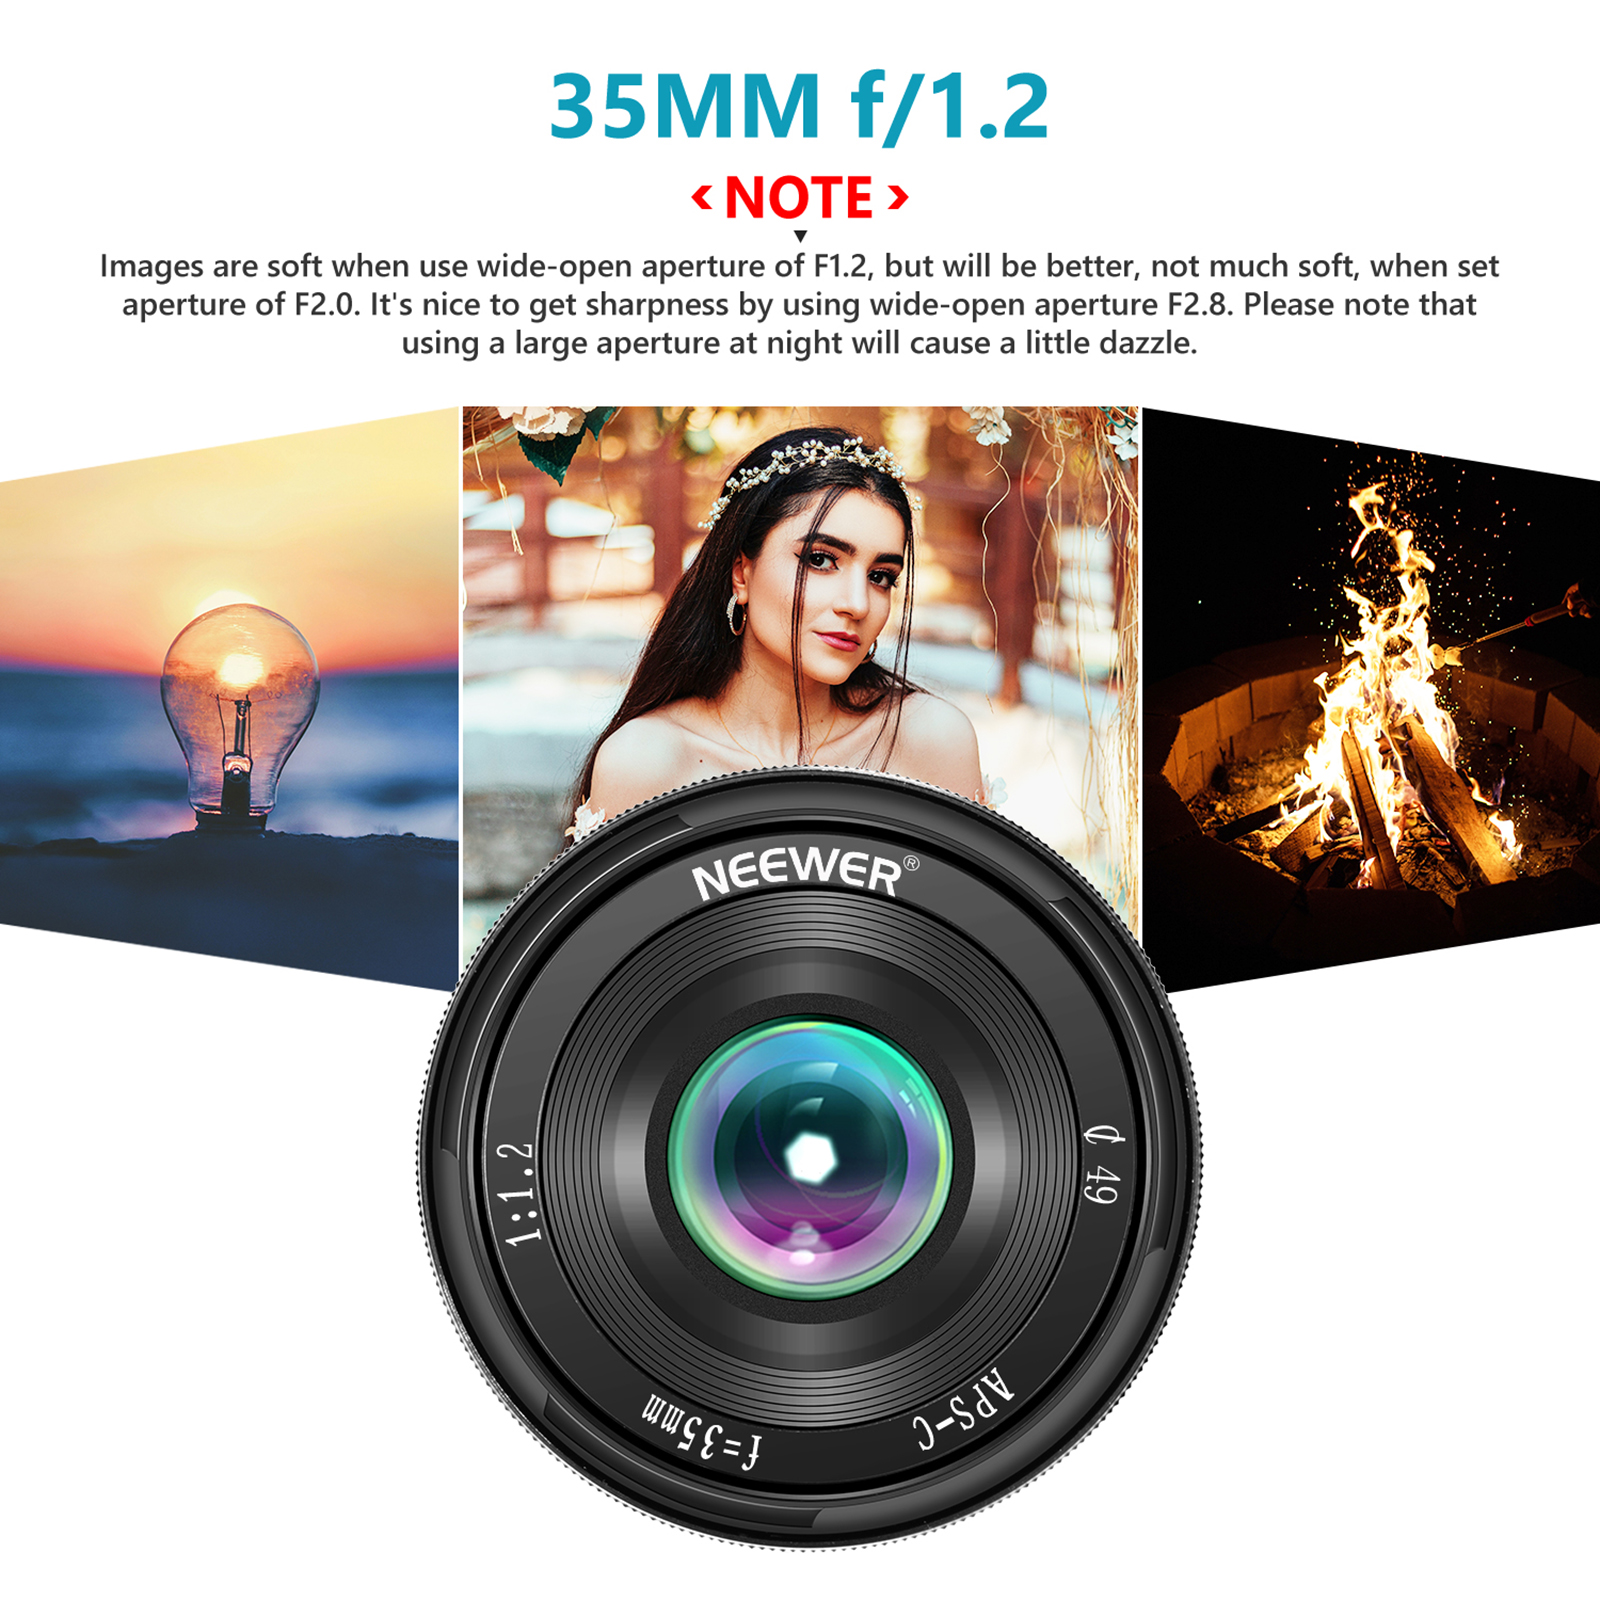 Neewer 32mm F//1.6 Manual Focus Prime Lens Sharp High Aperture for Sony E-Mount APS-C Mirrorless Camera like SONY NEX A7III A9 NEX 3 5 5T NEX 5R 6 7 A5100 A6000 A6100 A6300 A6500